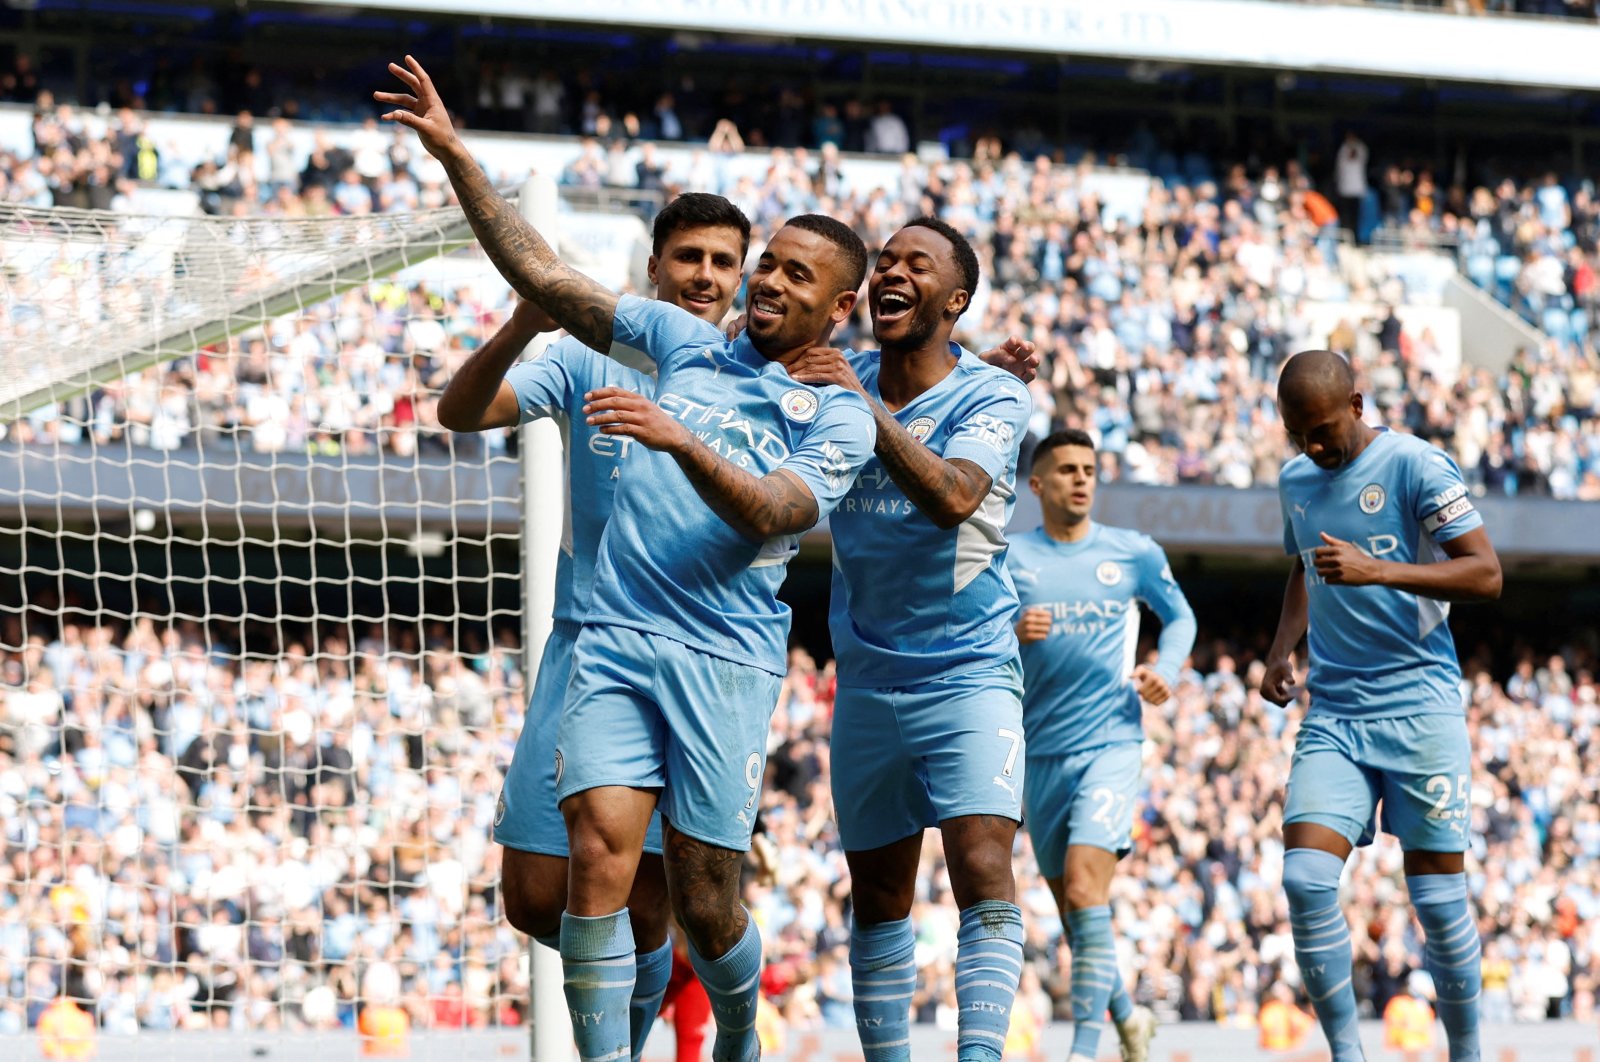 Man City&#039;s Gabriel Jesus (2nd L) celebrates with teammates after scoring in a Premier League game against Watford, Manchester, England, April 23, 2022. (Reuters Photo)